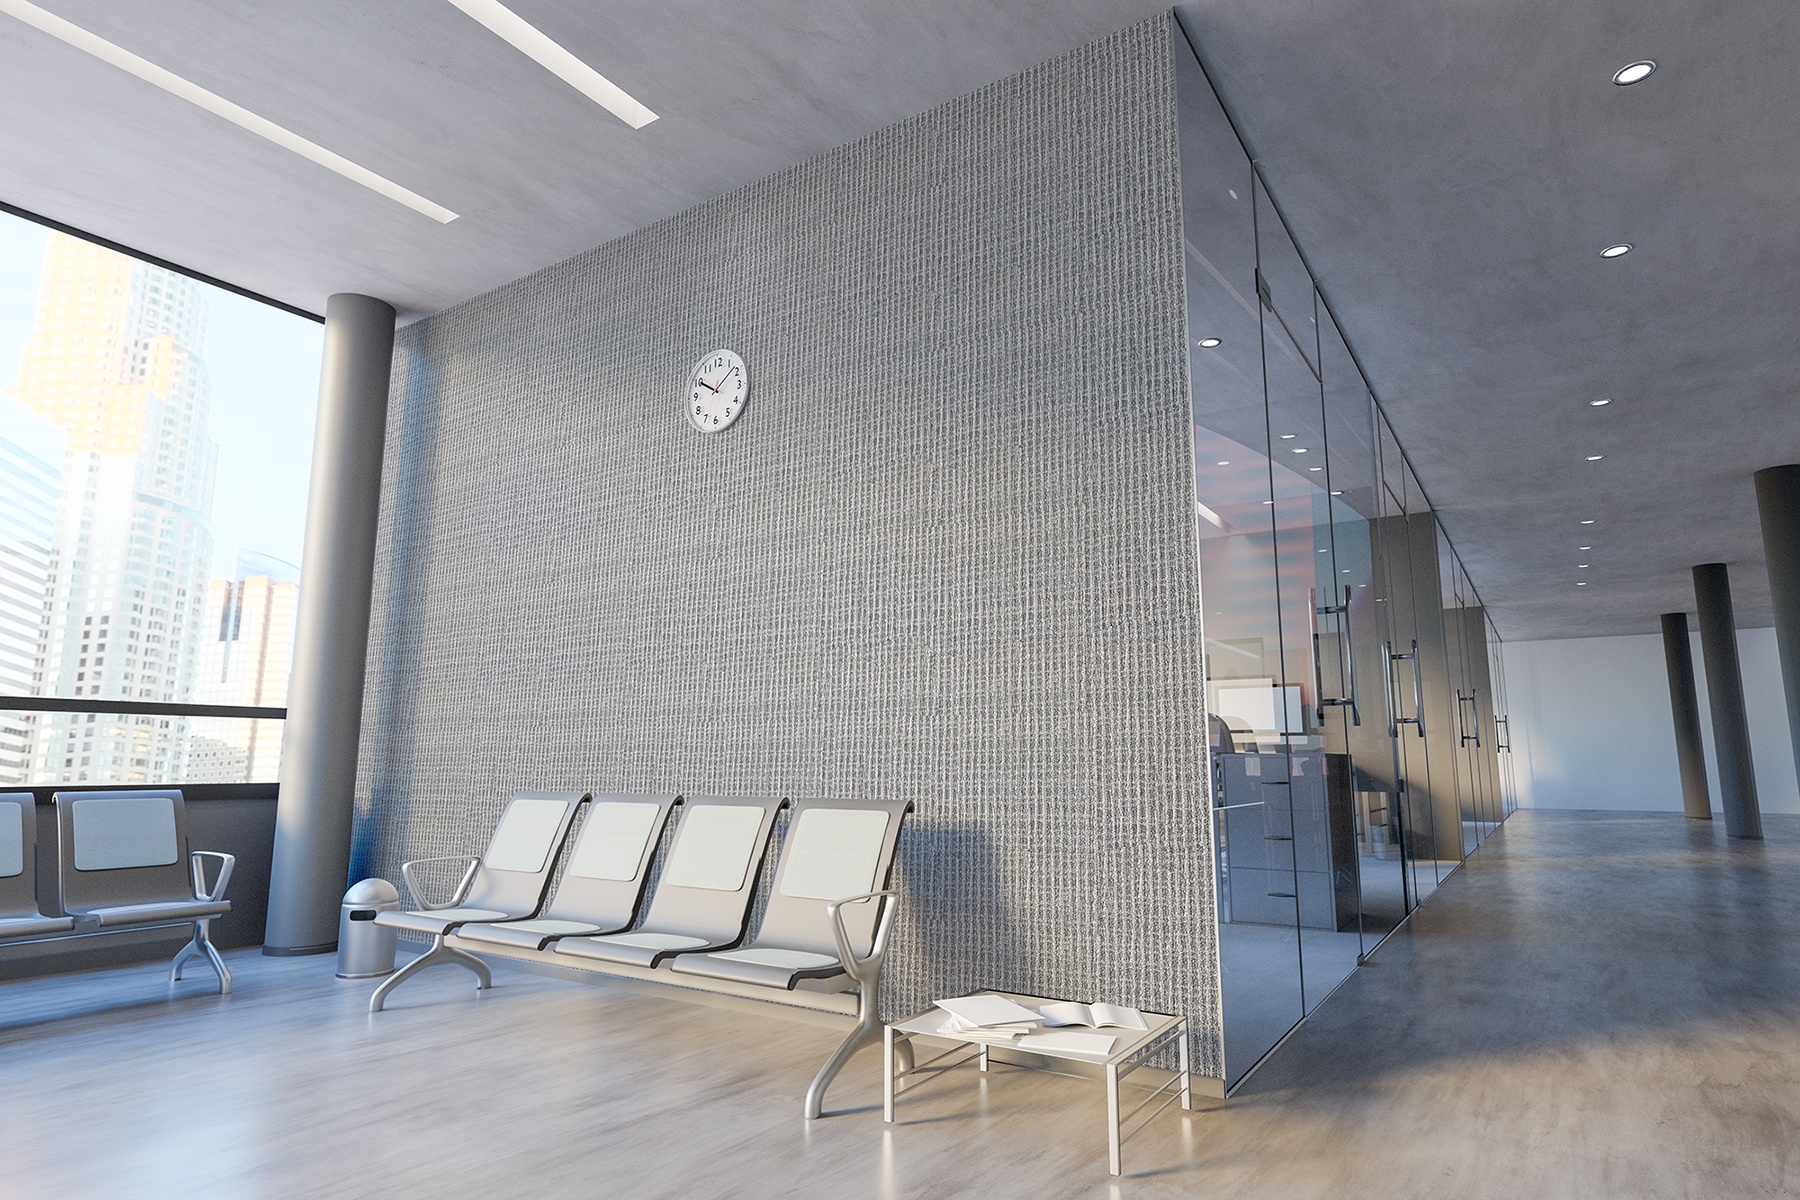 Office wallpaper in your commercial interior design - Wallscape